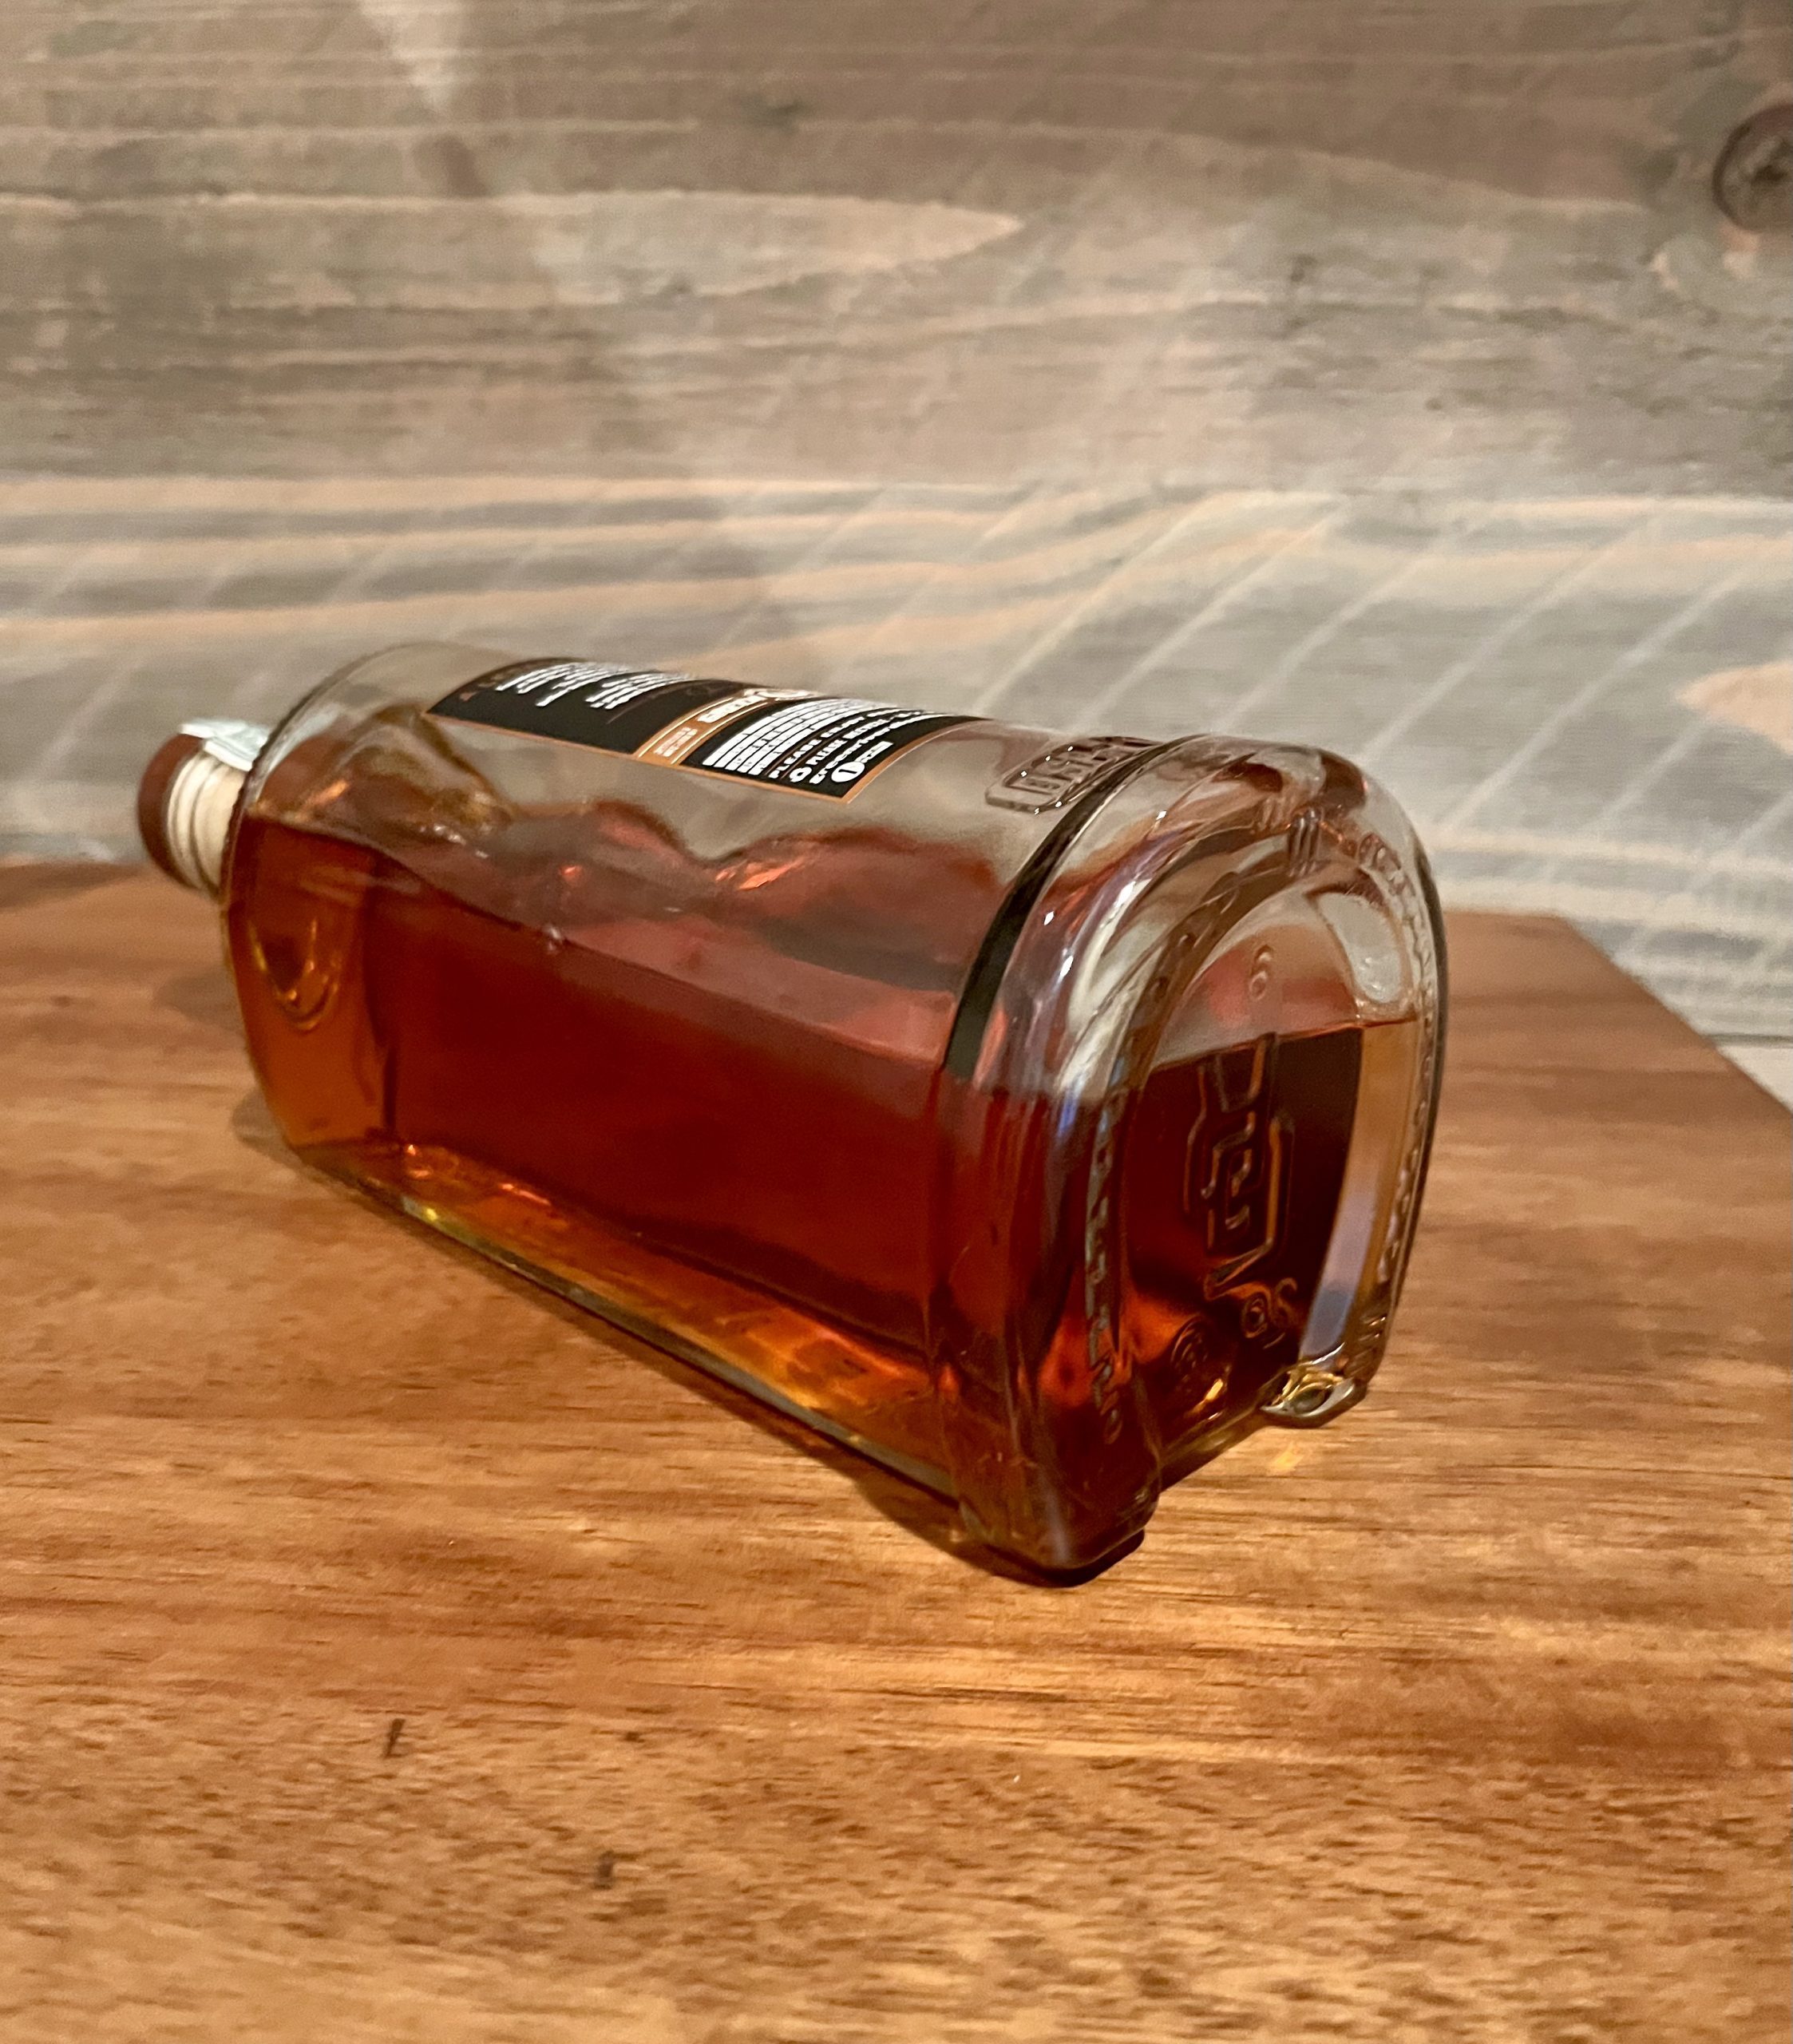 Bottle laying down side view